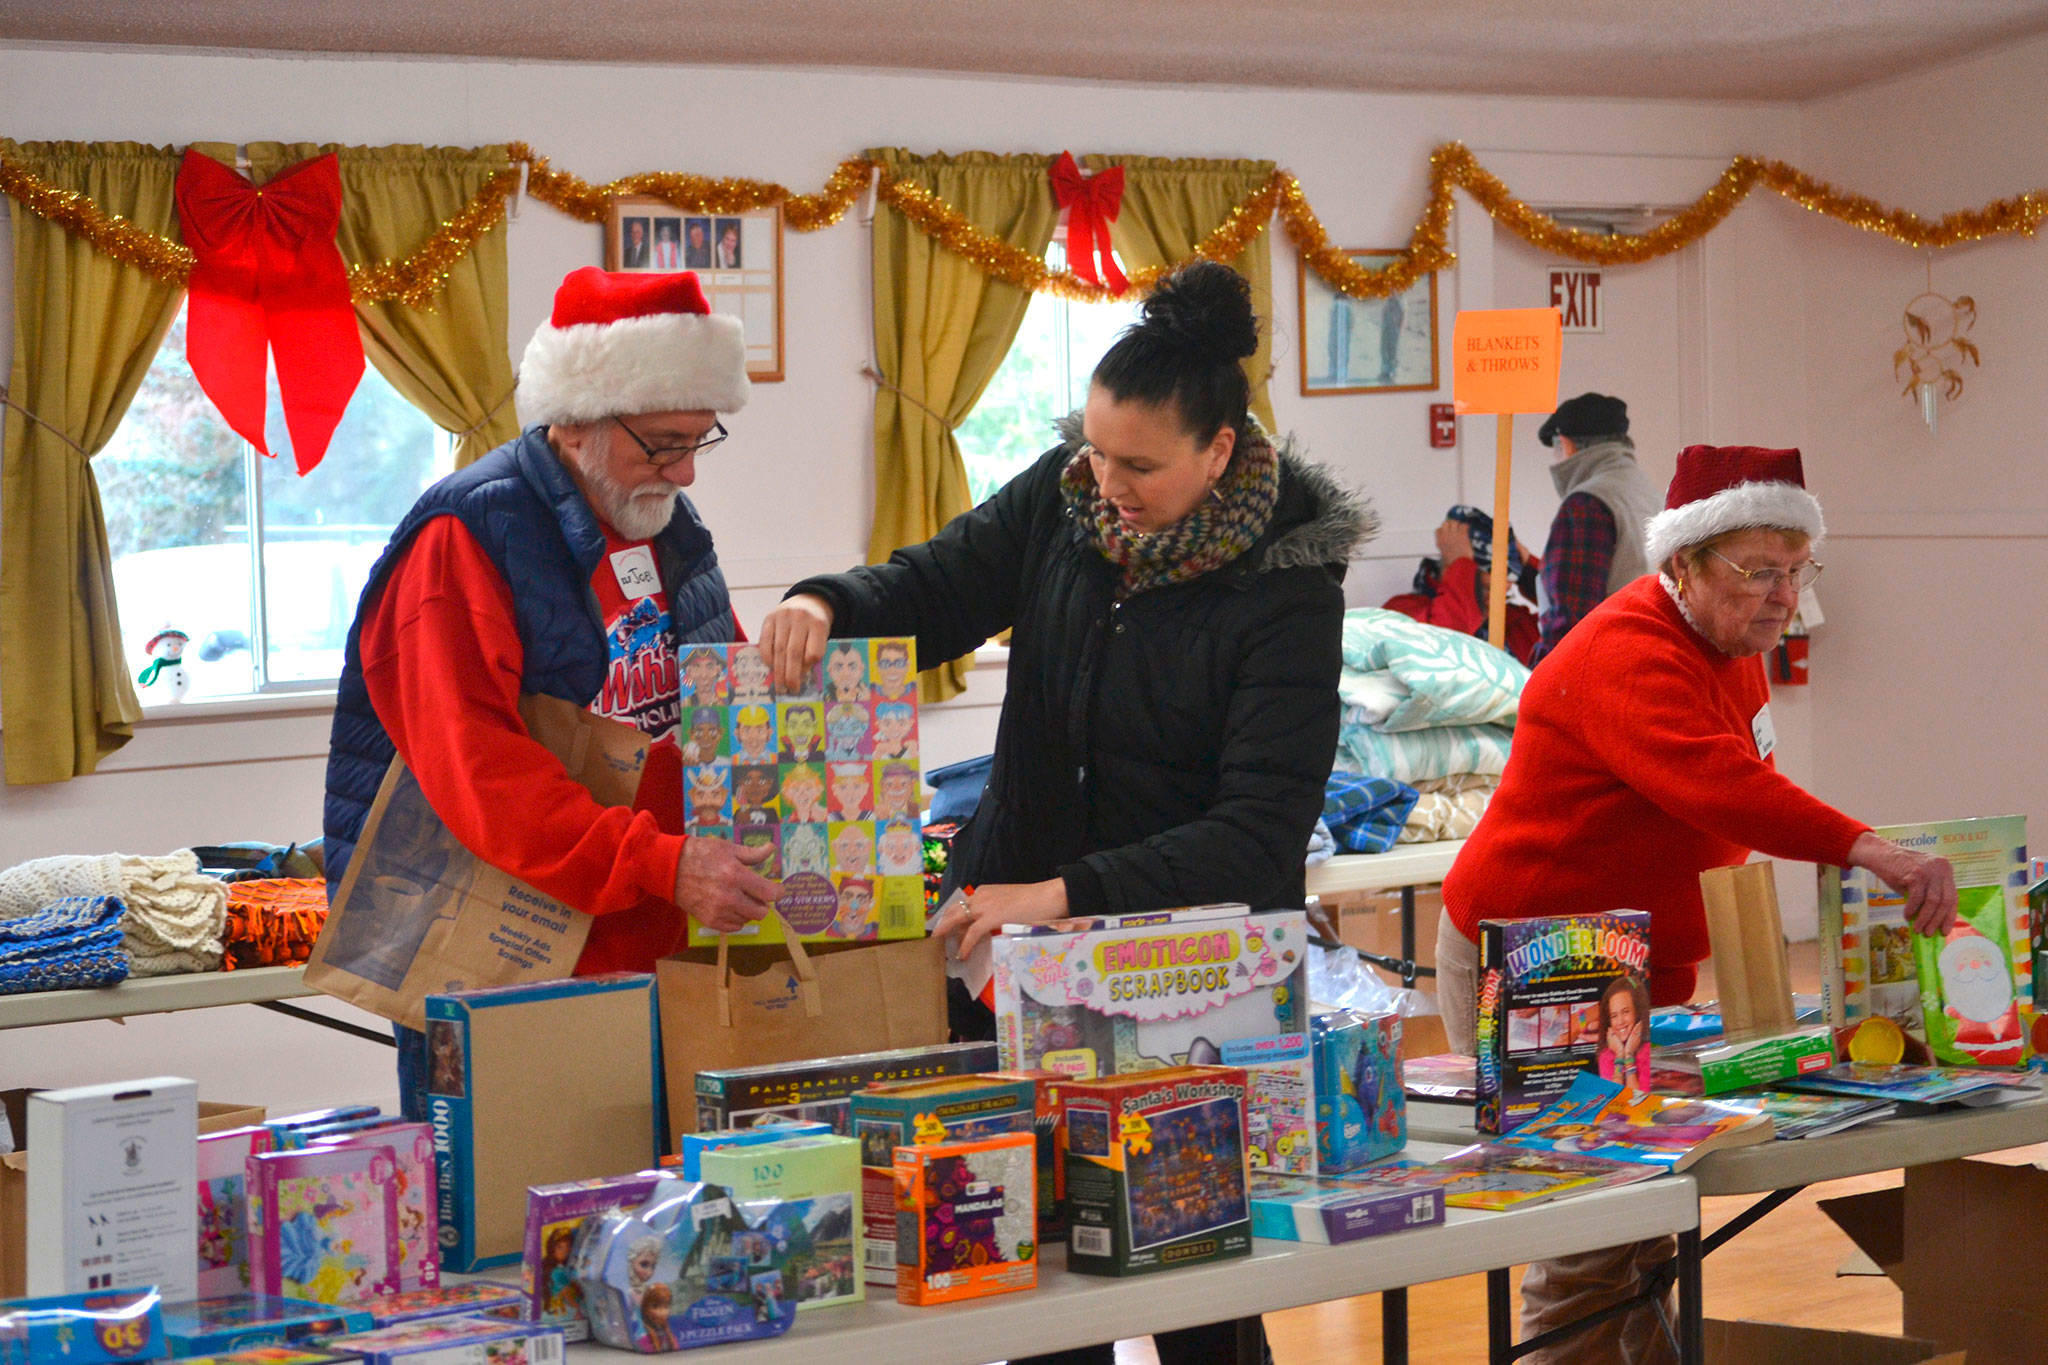 Volunteers Joel Ogden and Anne Notman with Sequim Community Aid help Sheena Touchard, right, look for toys at last year’s Toys for Sequim Kids. Organizers said 400 children in Sequim received items from the event in 2016. This year, the event is set for Dec. 13 at the Sequim Prairie Grange. (Matthew Nash/Olympic Peninsula News Group)